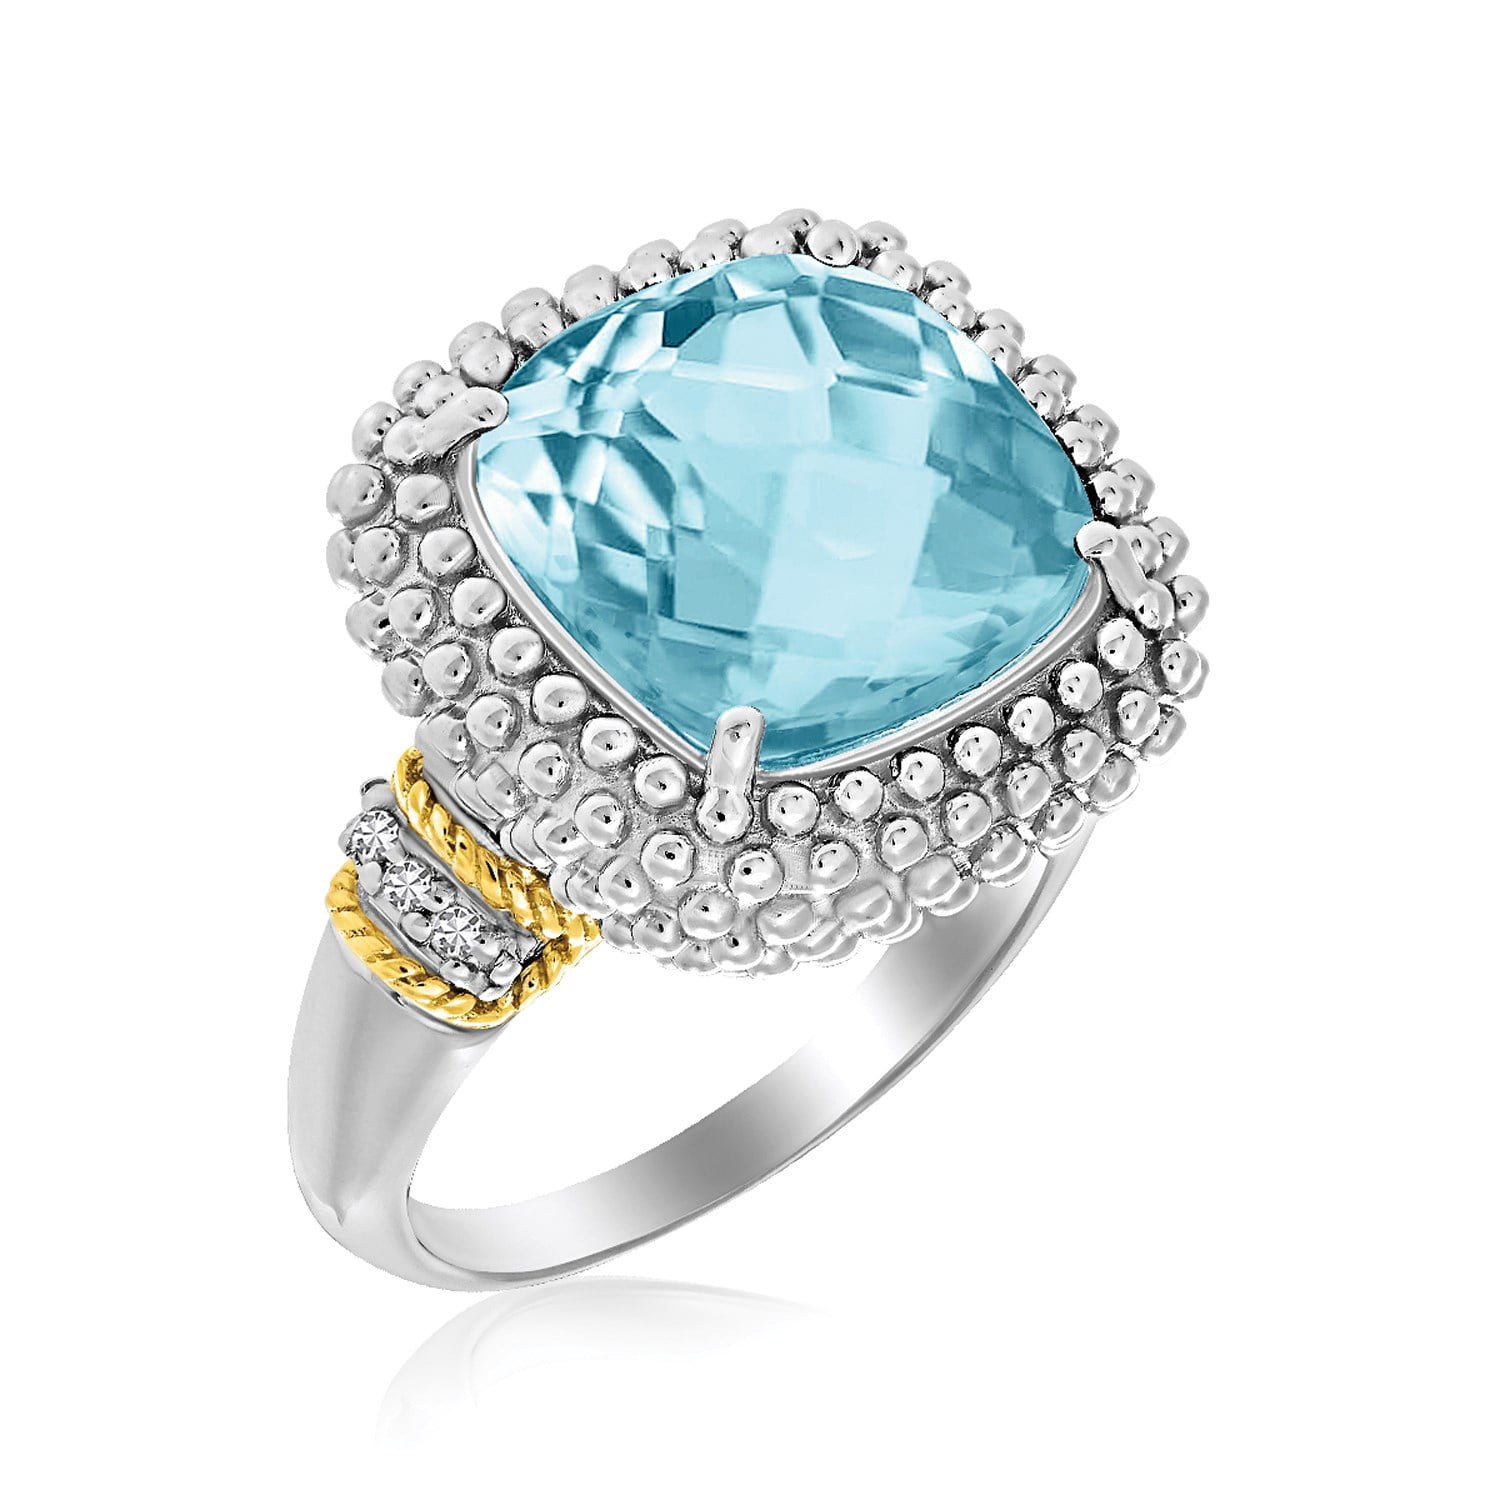 Details about   3.6 ct Platinum Plated 925 Sterling Silver Ring Natural Blue Topaz